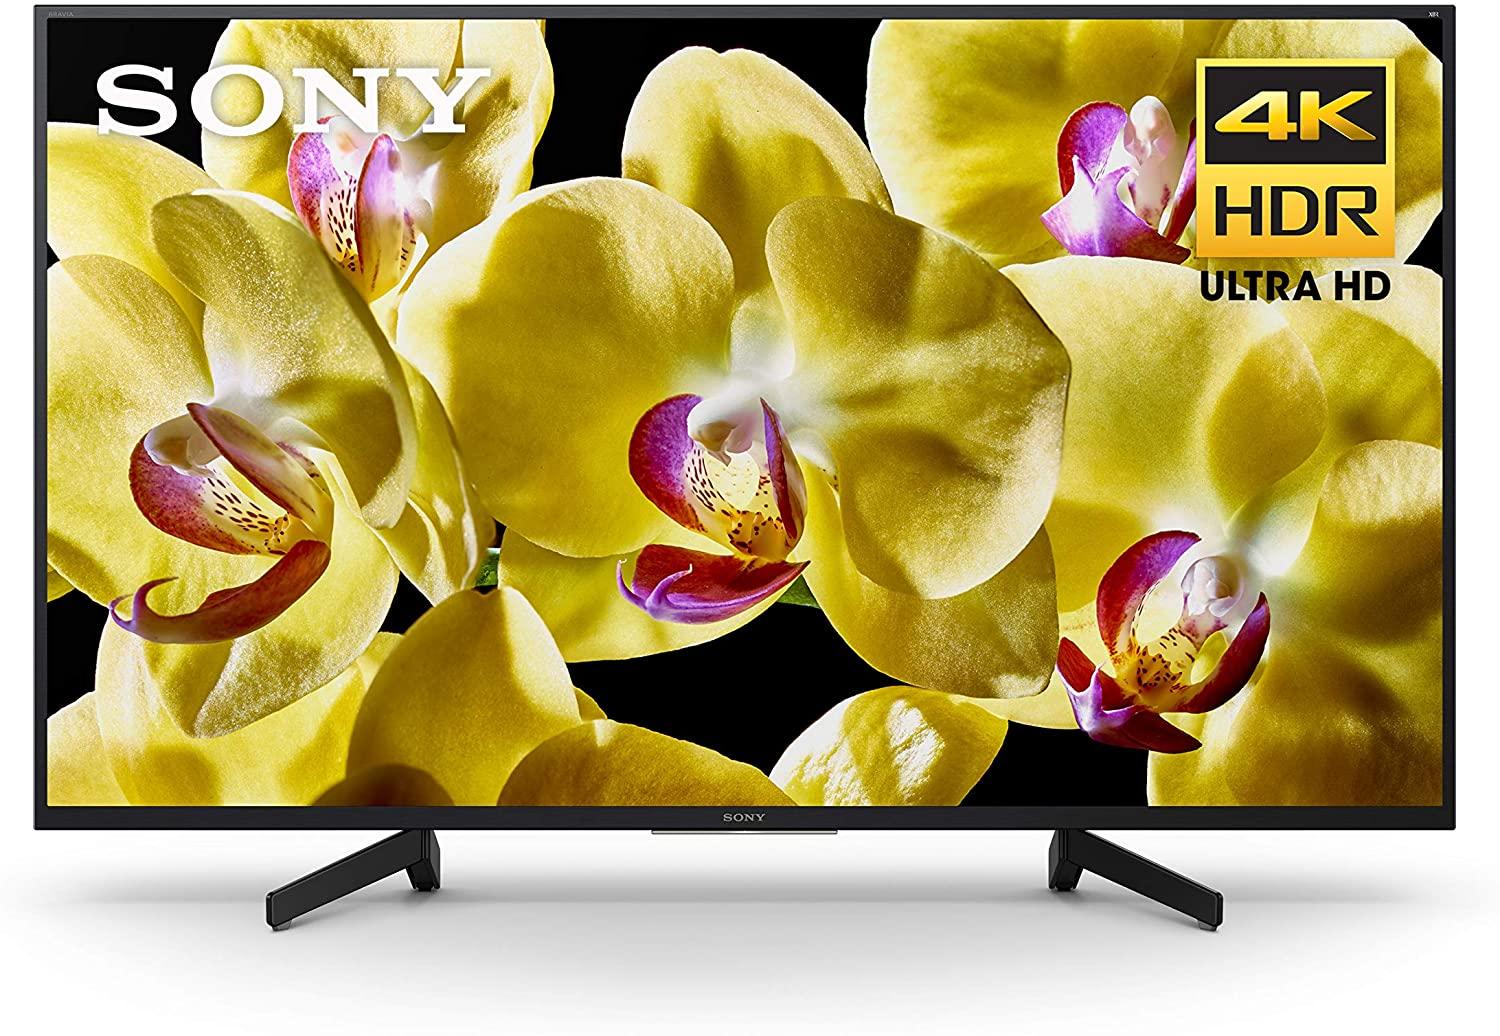 Sony XBR-49X800G 49in 4K UHD LED Smart Android TV for $499 Shipped